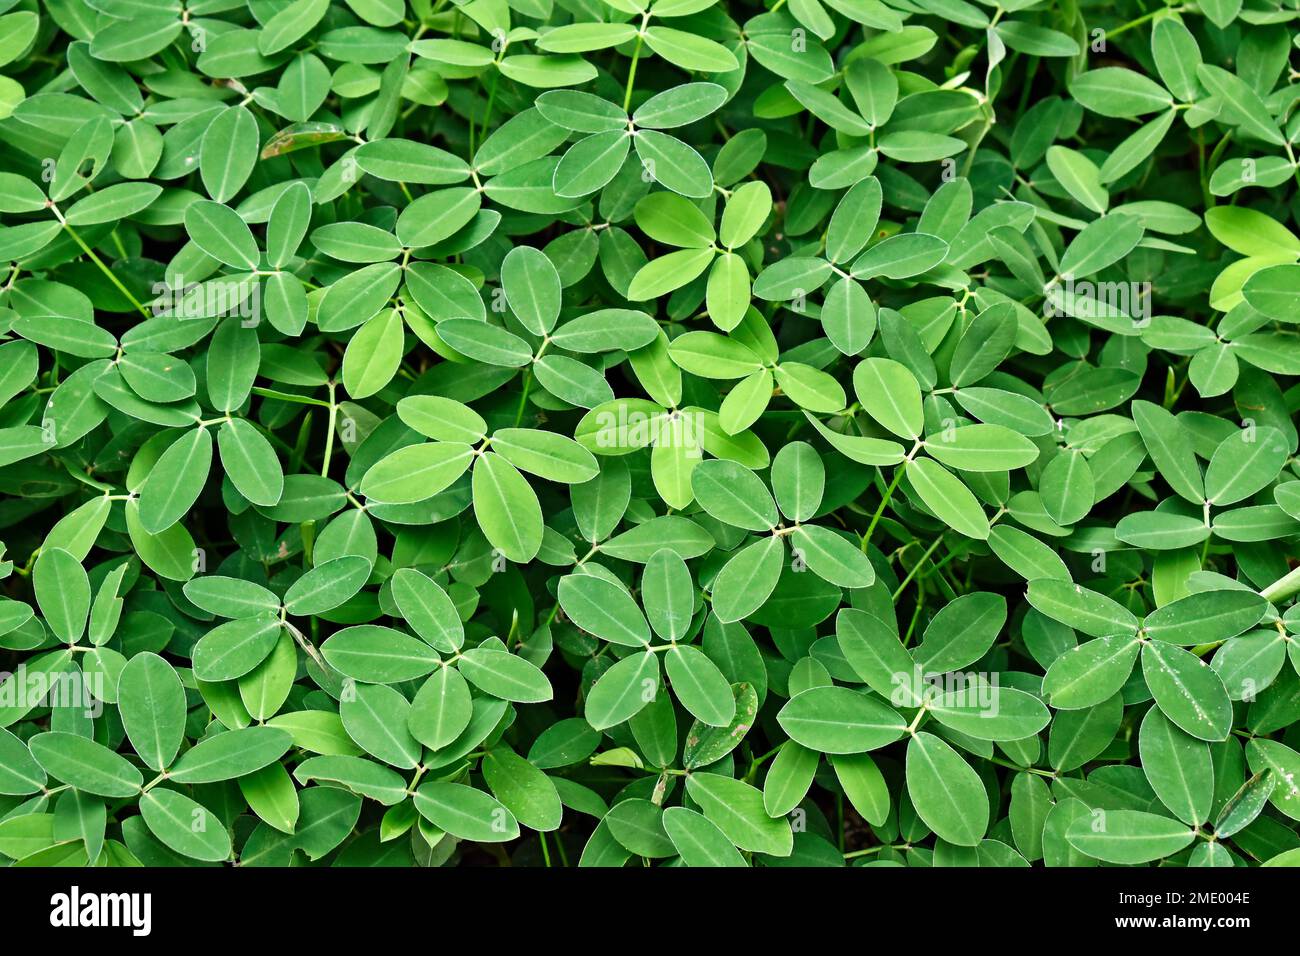 Peanut grass (Arachis repens), plant often used as a forage and ornamental plant Stock Photo